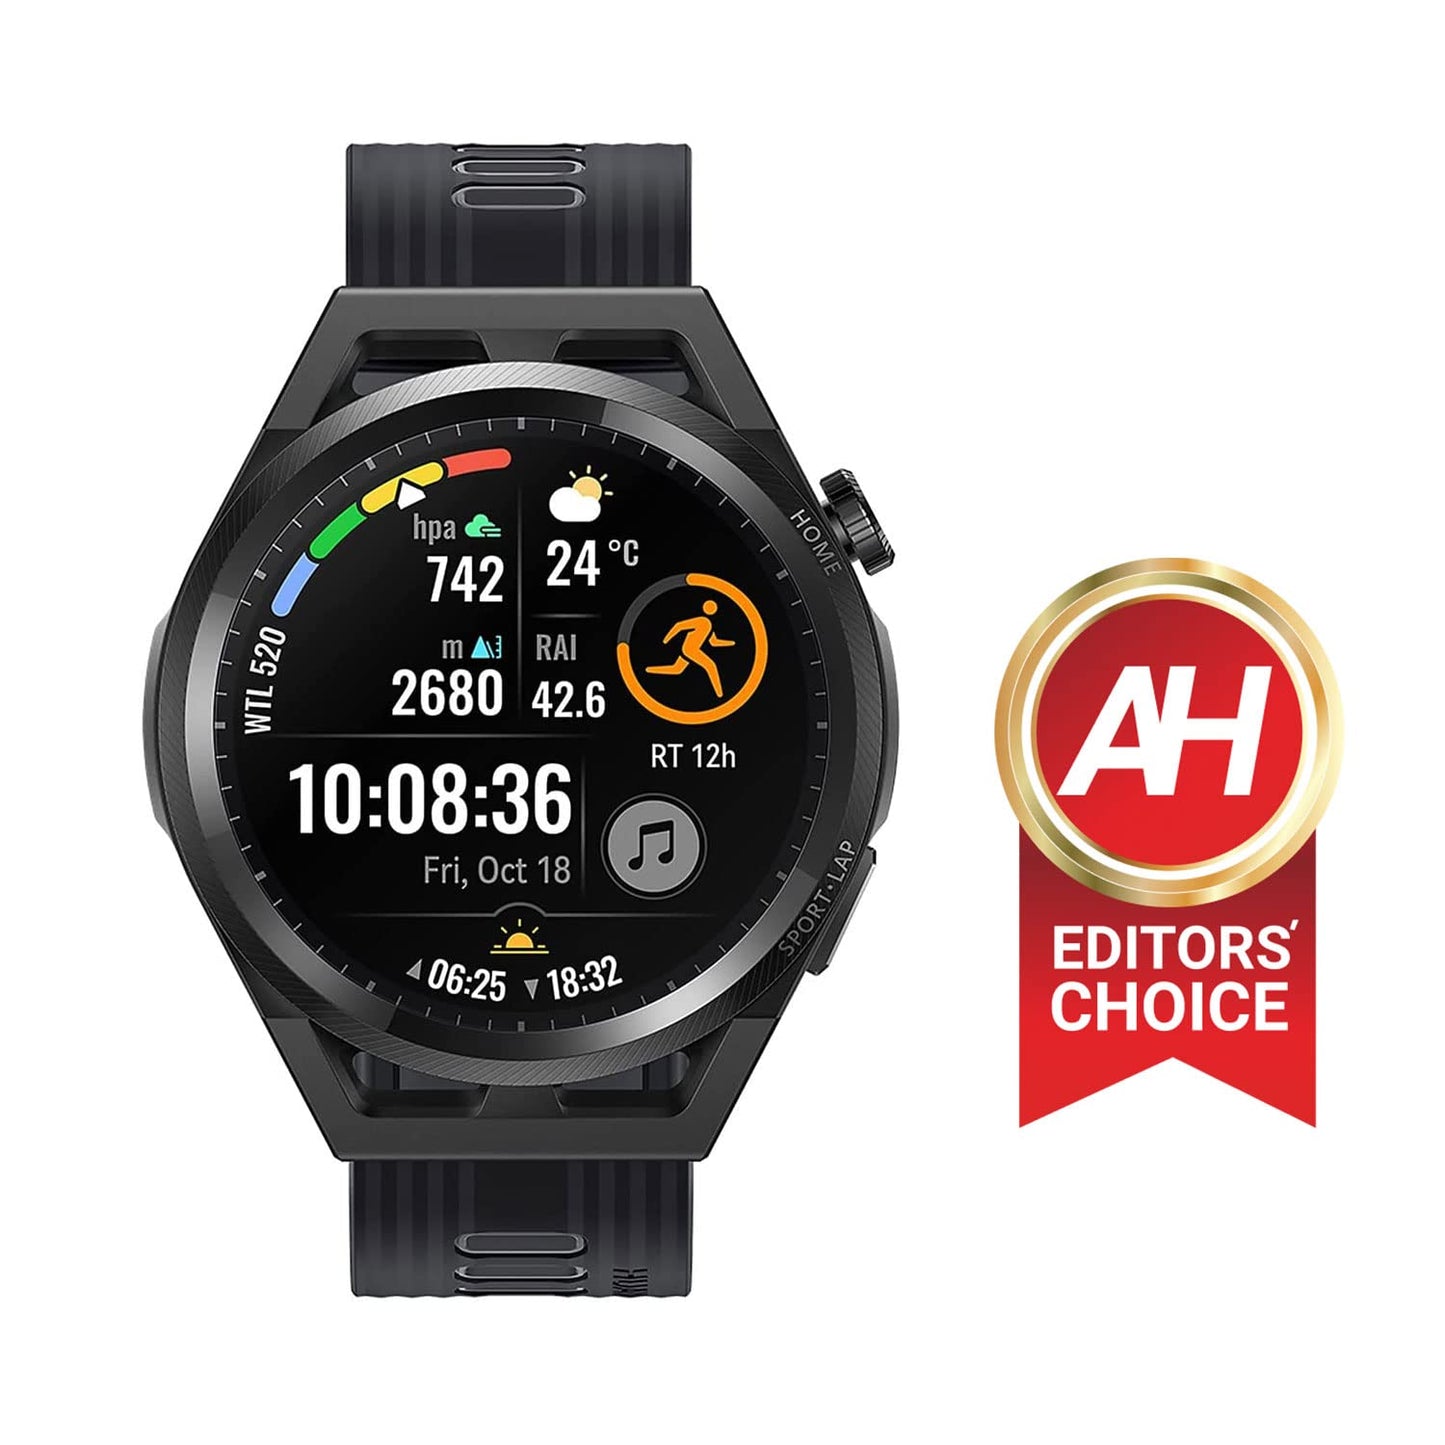 HUAWEI WATCH GT Runner Smartwatch - Scientific Running Program, Accurate Real-Time Heart Rate Monitoring, Marathon Runway-Level Locating, Lightweight and Comfortable, 2 Week Battery Life - Black, 46mm